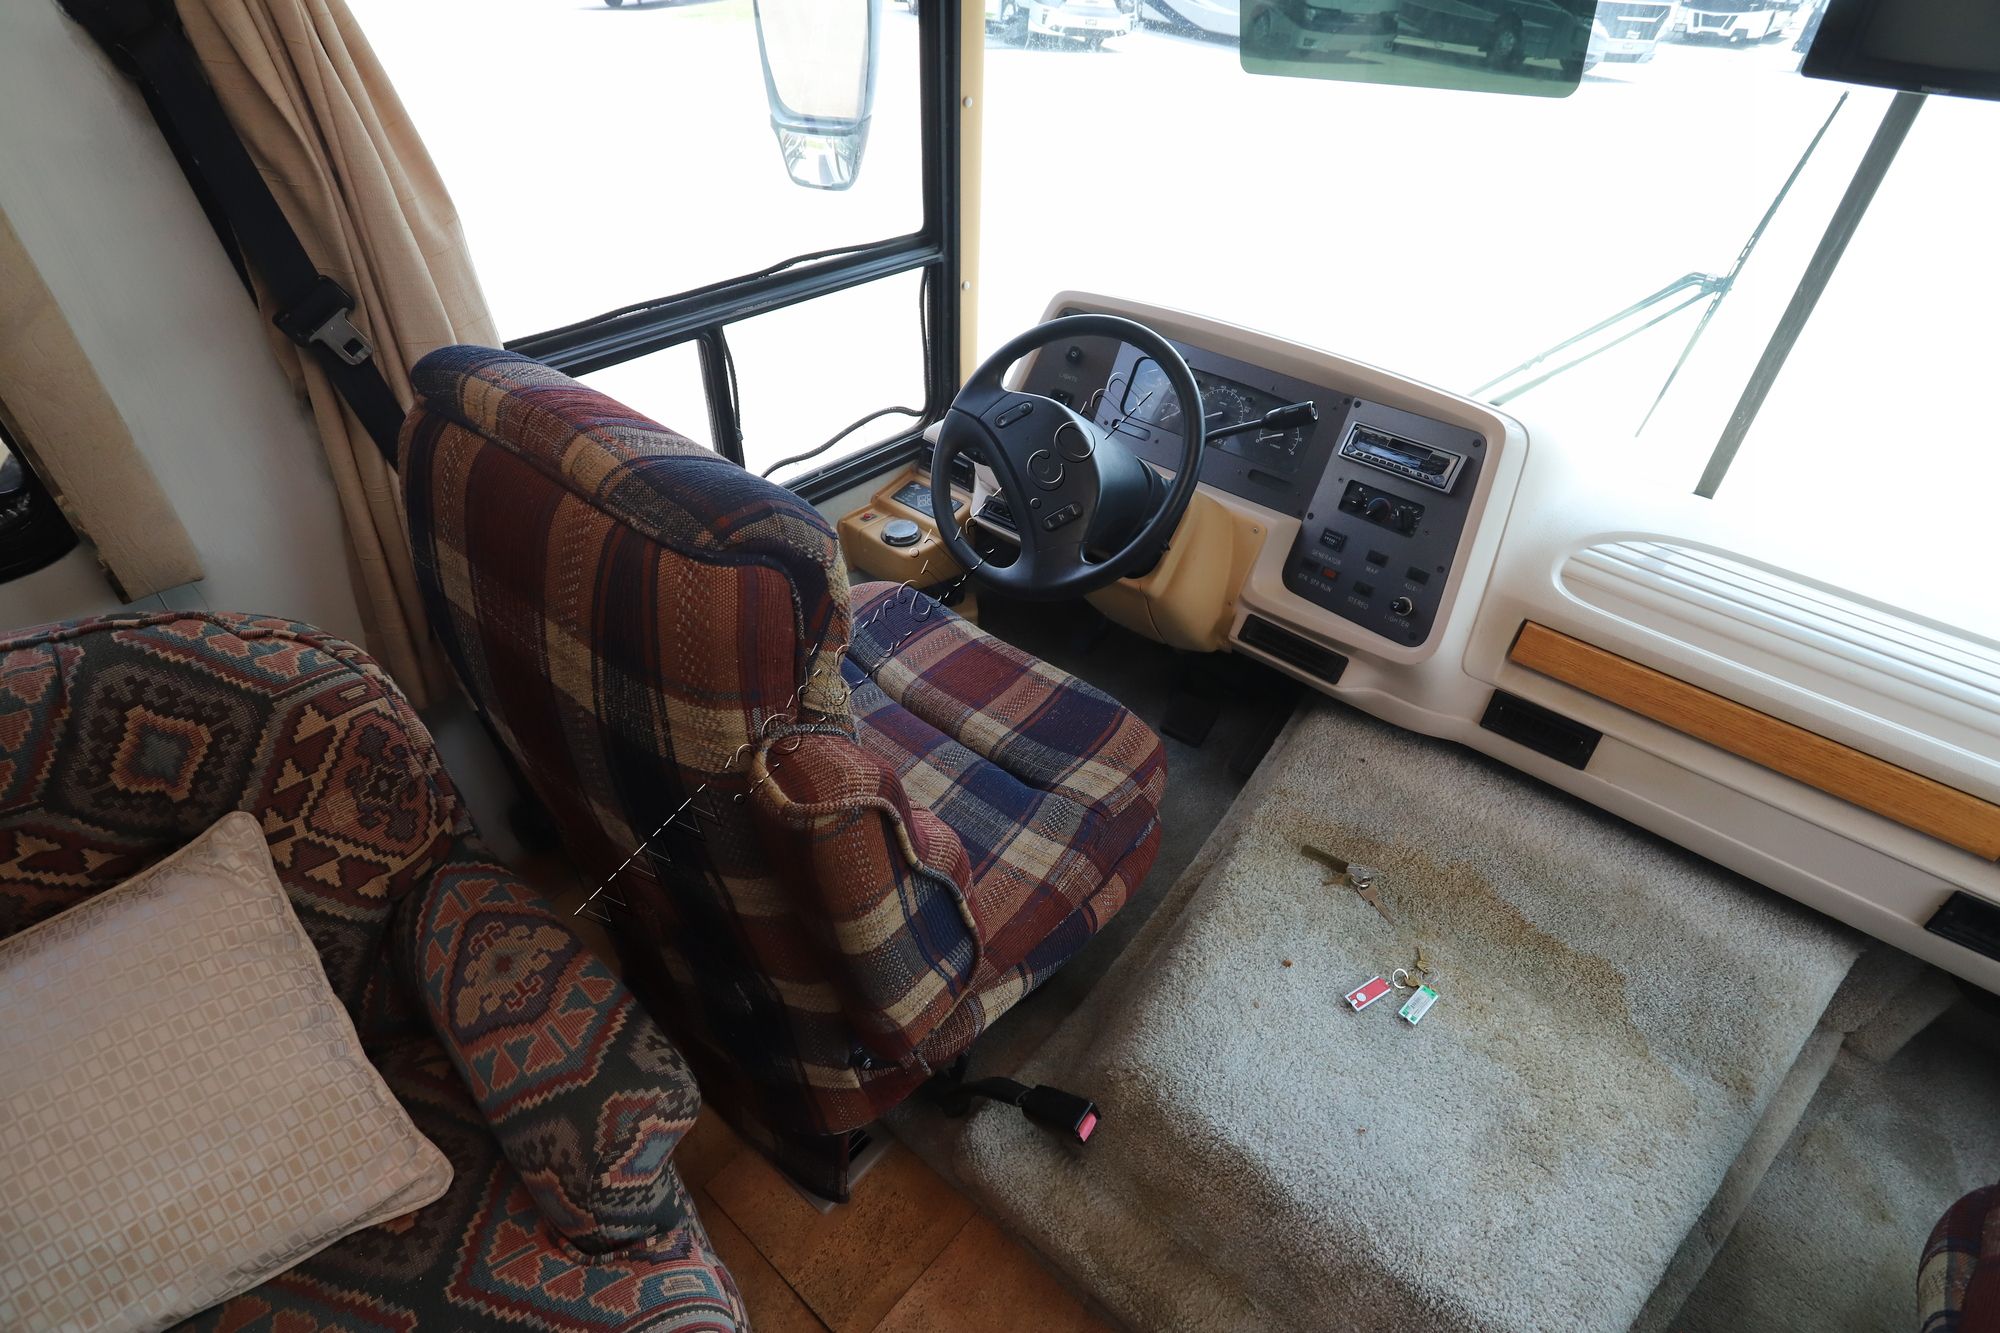 Used 1997 National Rv Dolphin 532 Class A  For Sale